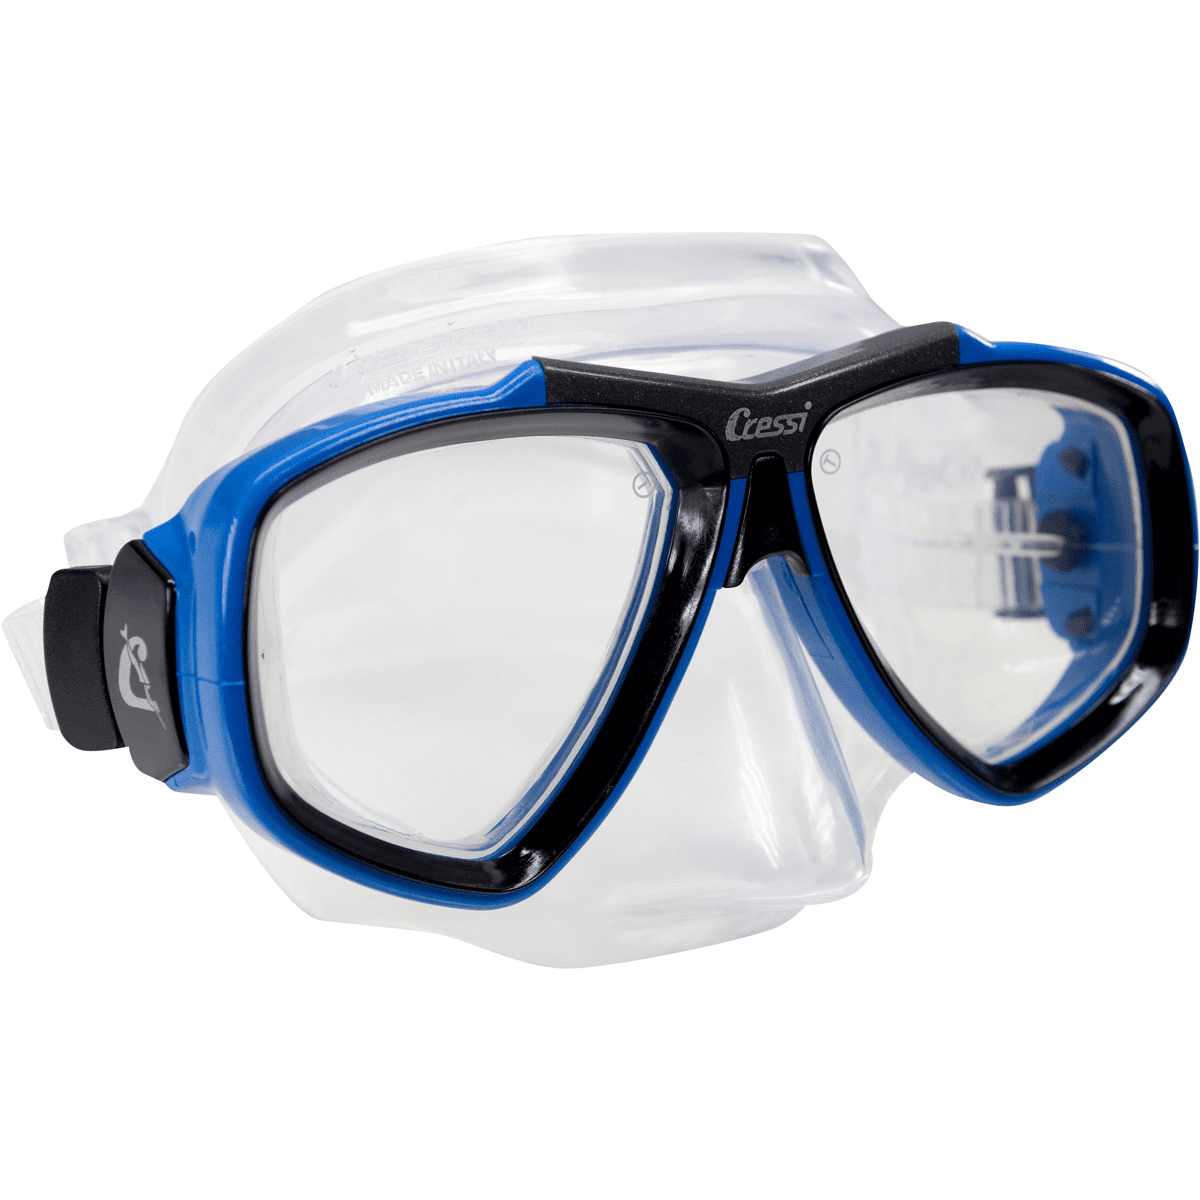 Cressi Focus Mask for Scuba and Snorkeling